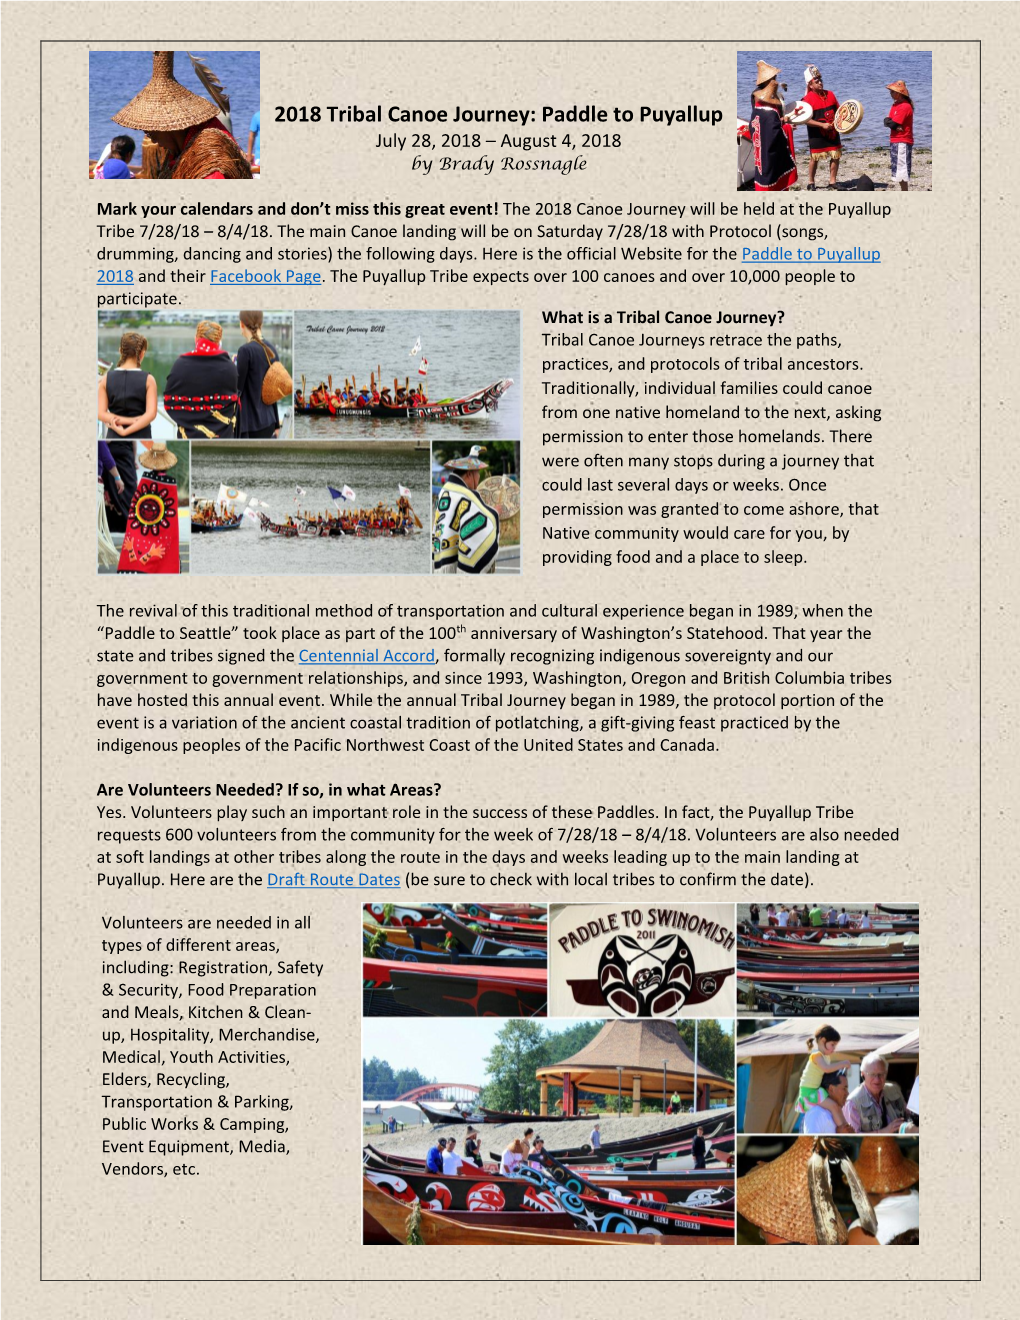 2018 Tribal Canoe Journey: Paddle to Puyallup July 28, 2018 – August 4, 2018 by Brady Rossnagle